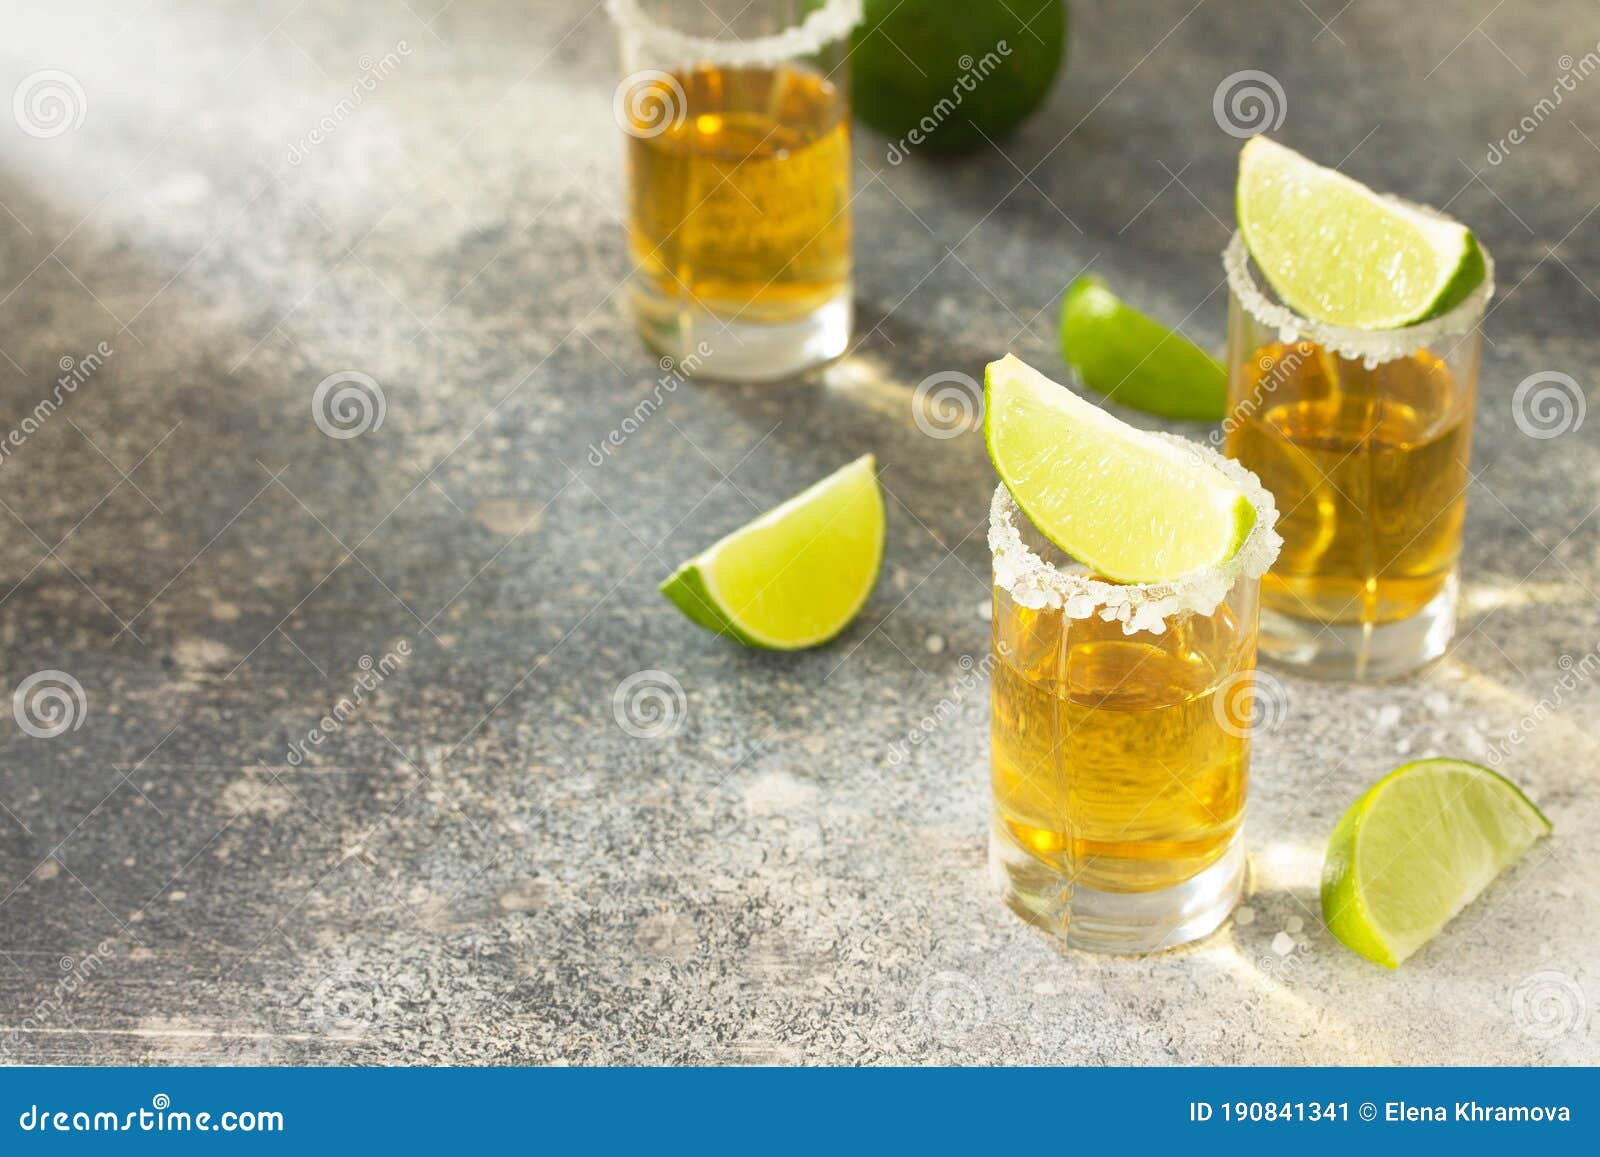 Gold Tequila. Mexican Gold Tequila Shot with Lime and Salt Stock Image ...